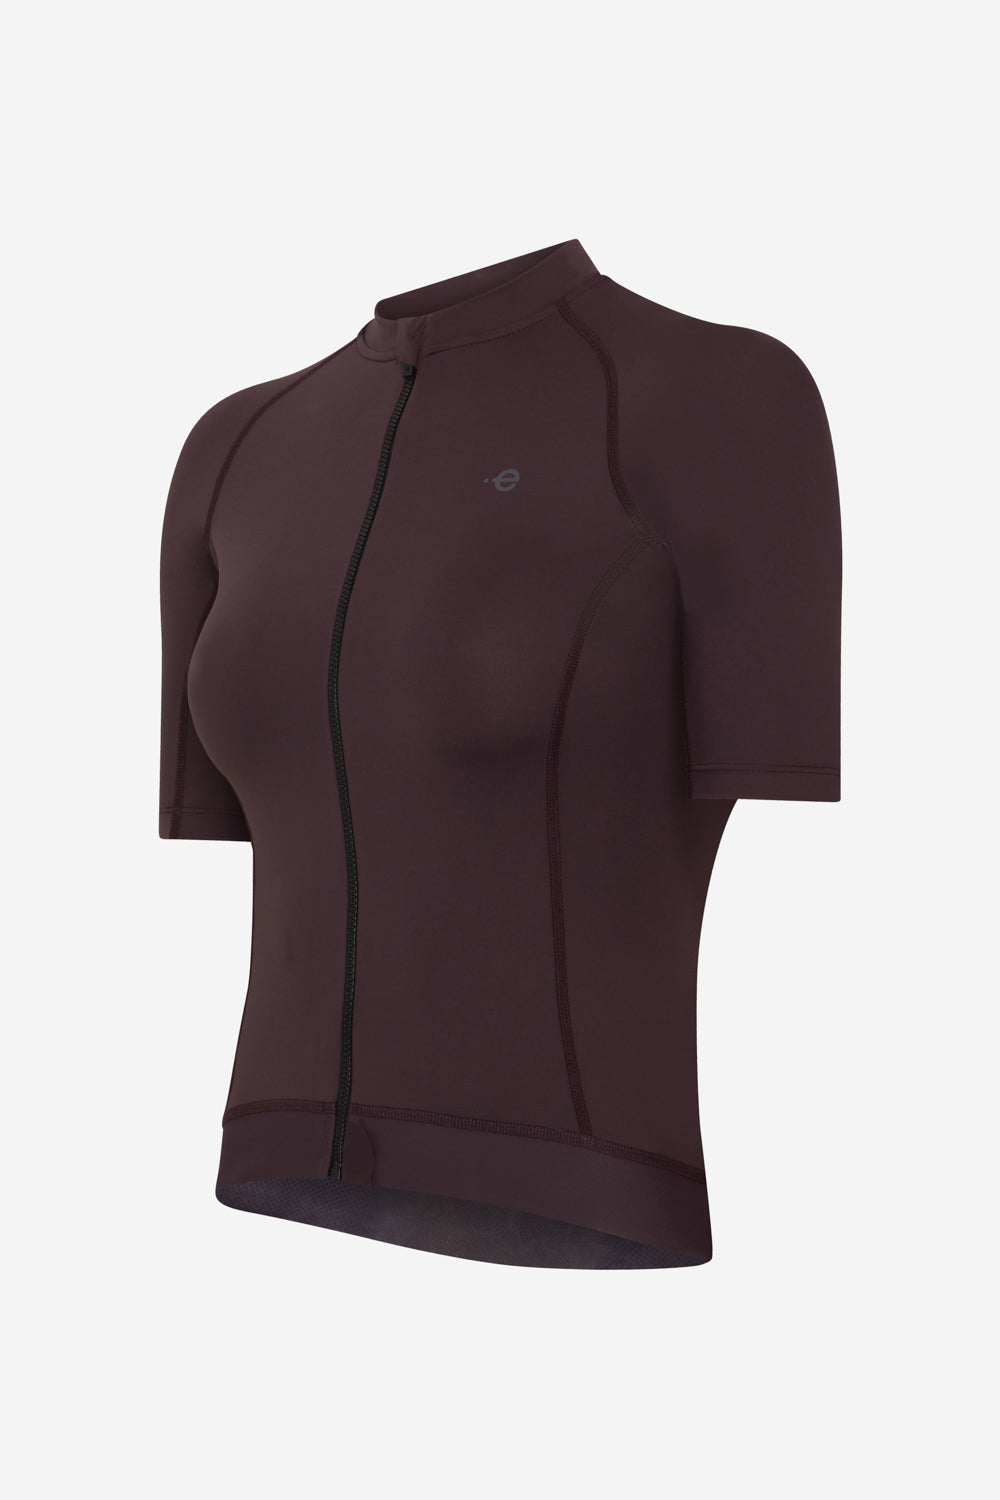 CALEDON PRO MAILLOT BROWN